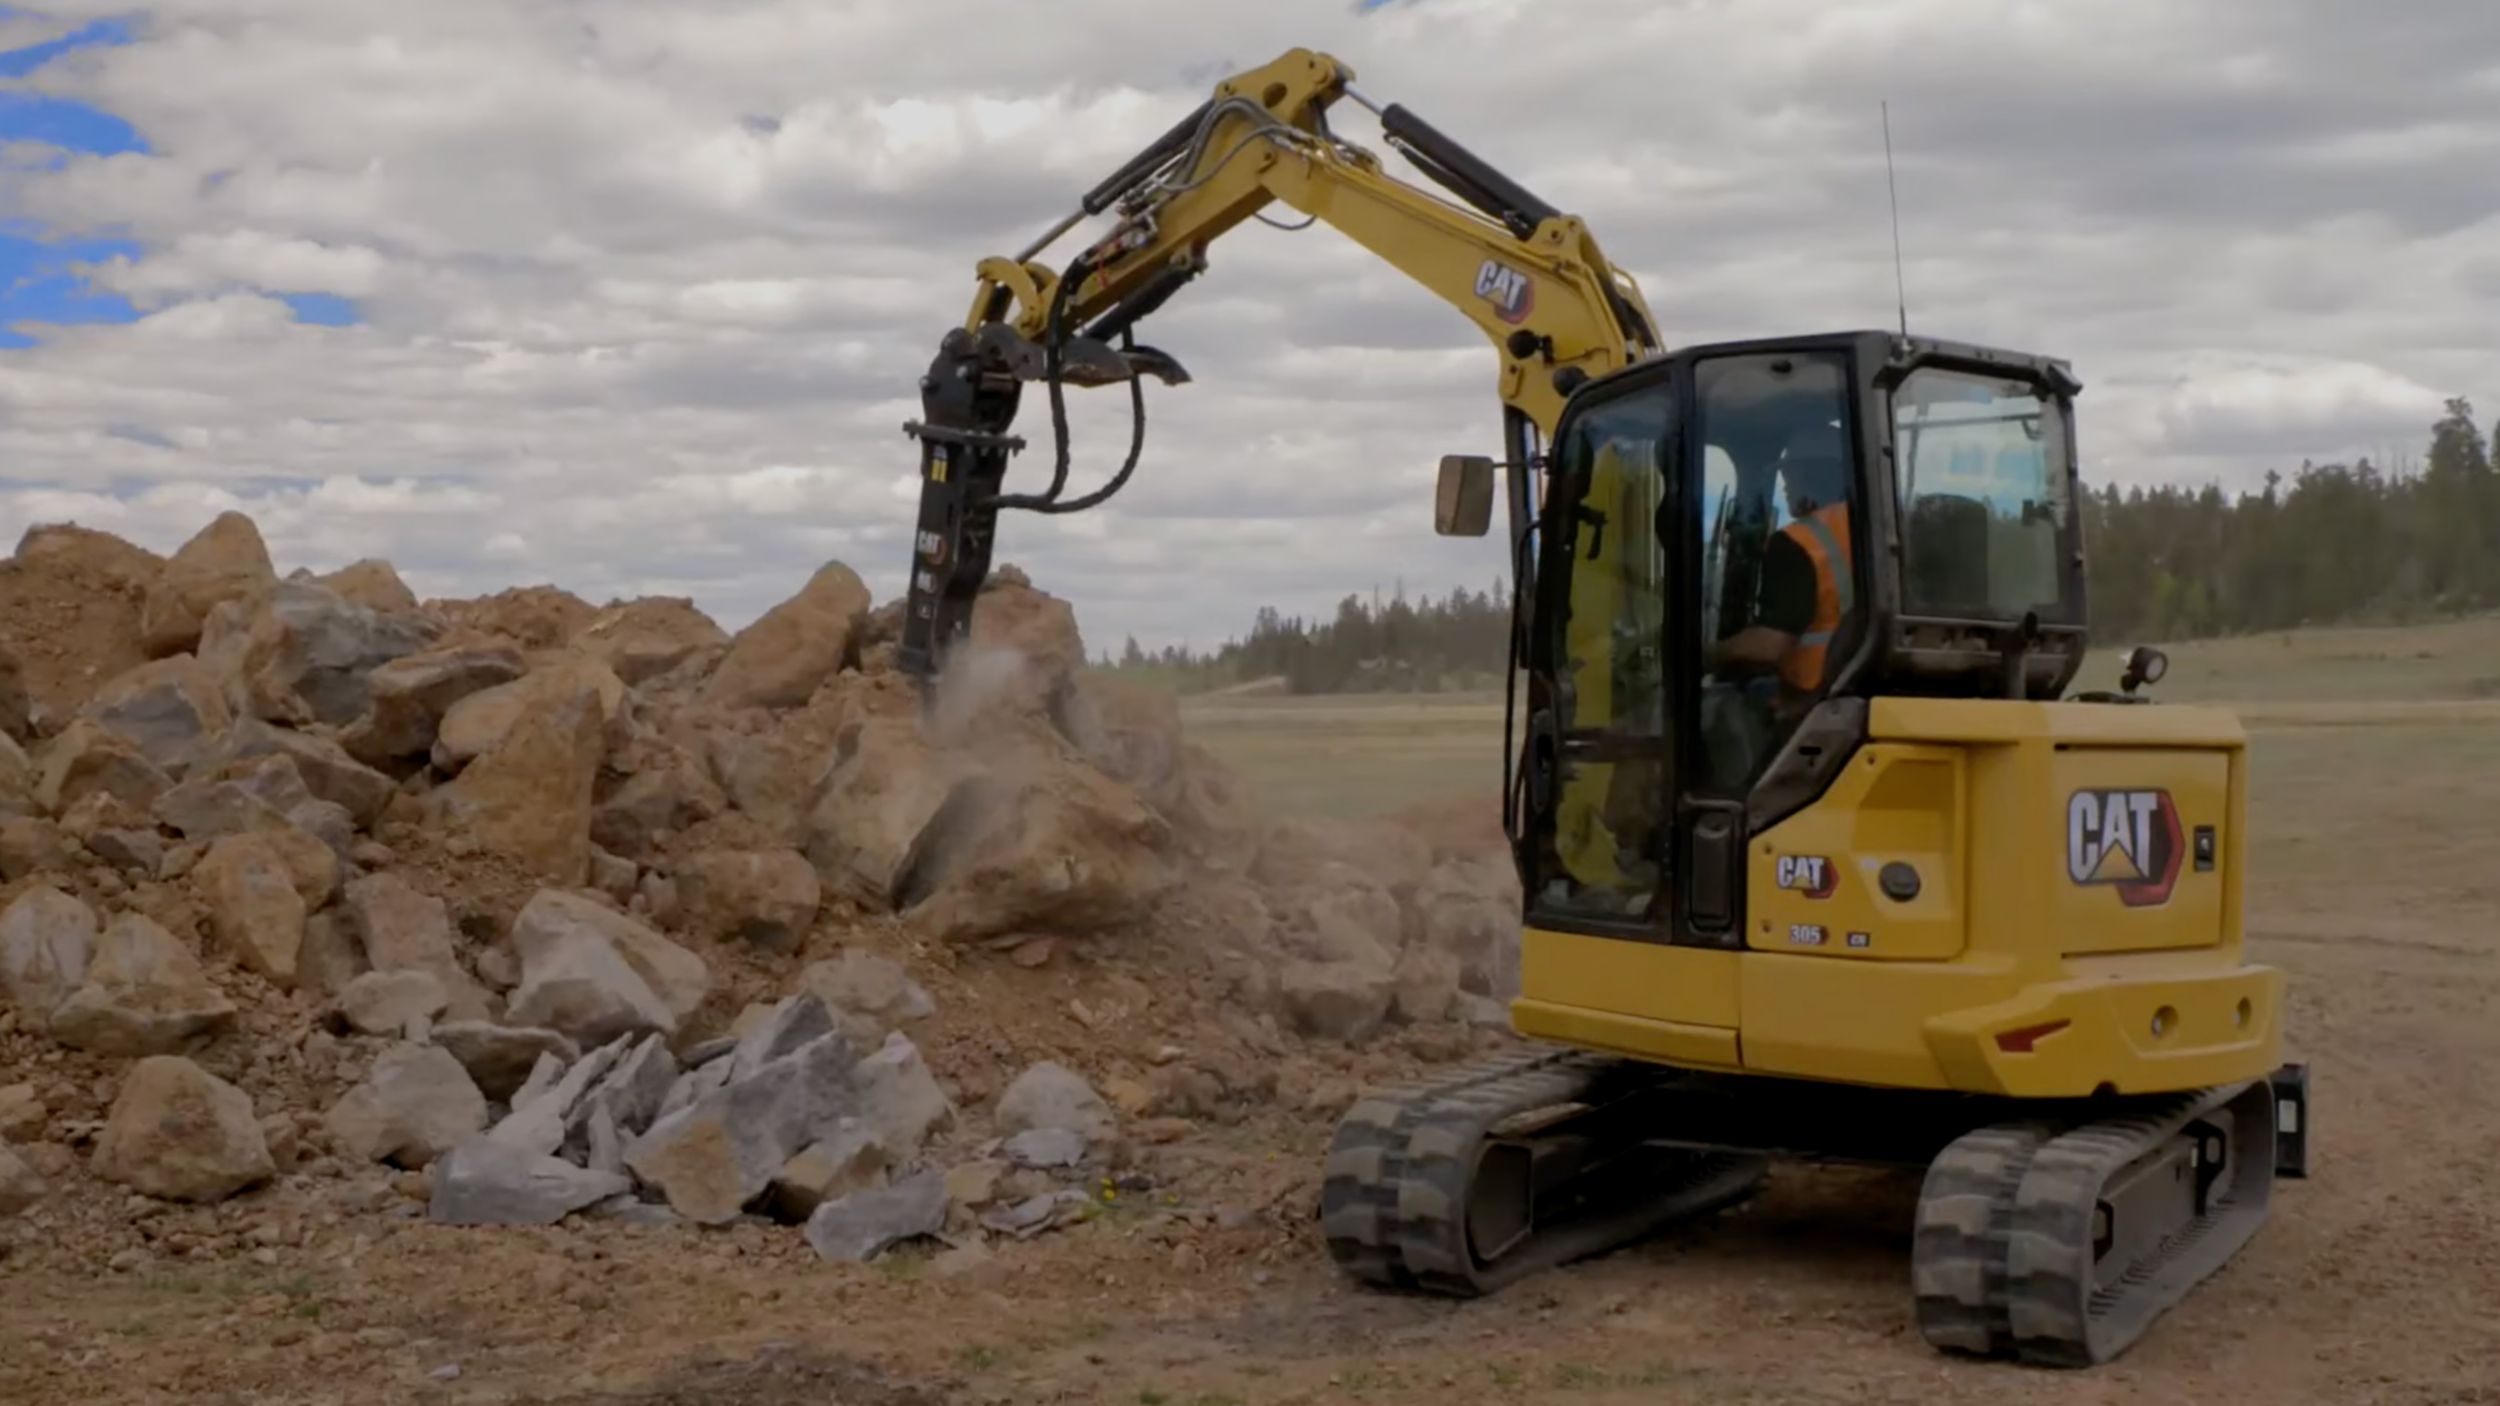 Watch the performance, serviceability and better overall operating experience in action in the Next Generation Cat® Mini Excavators.